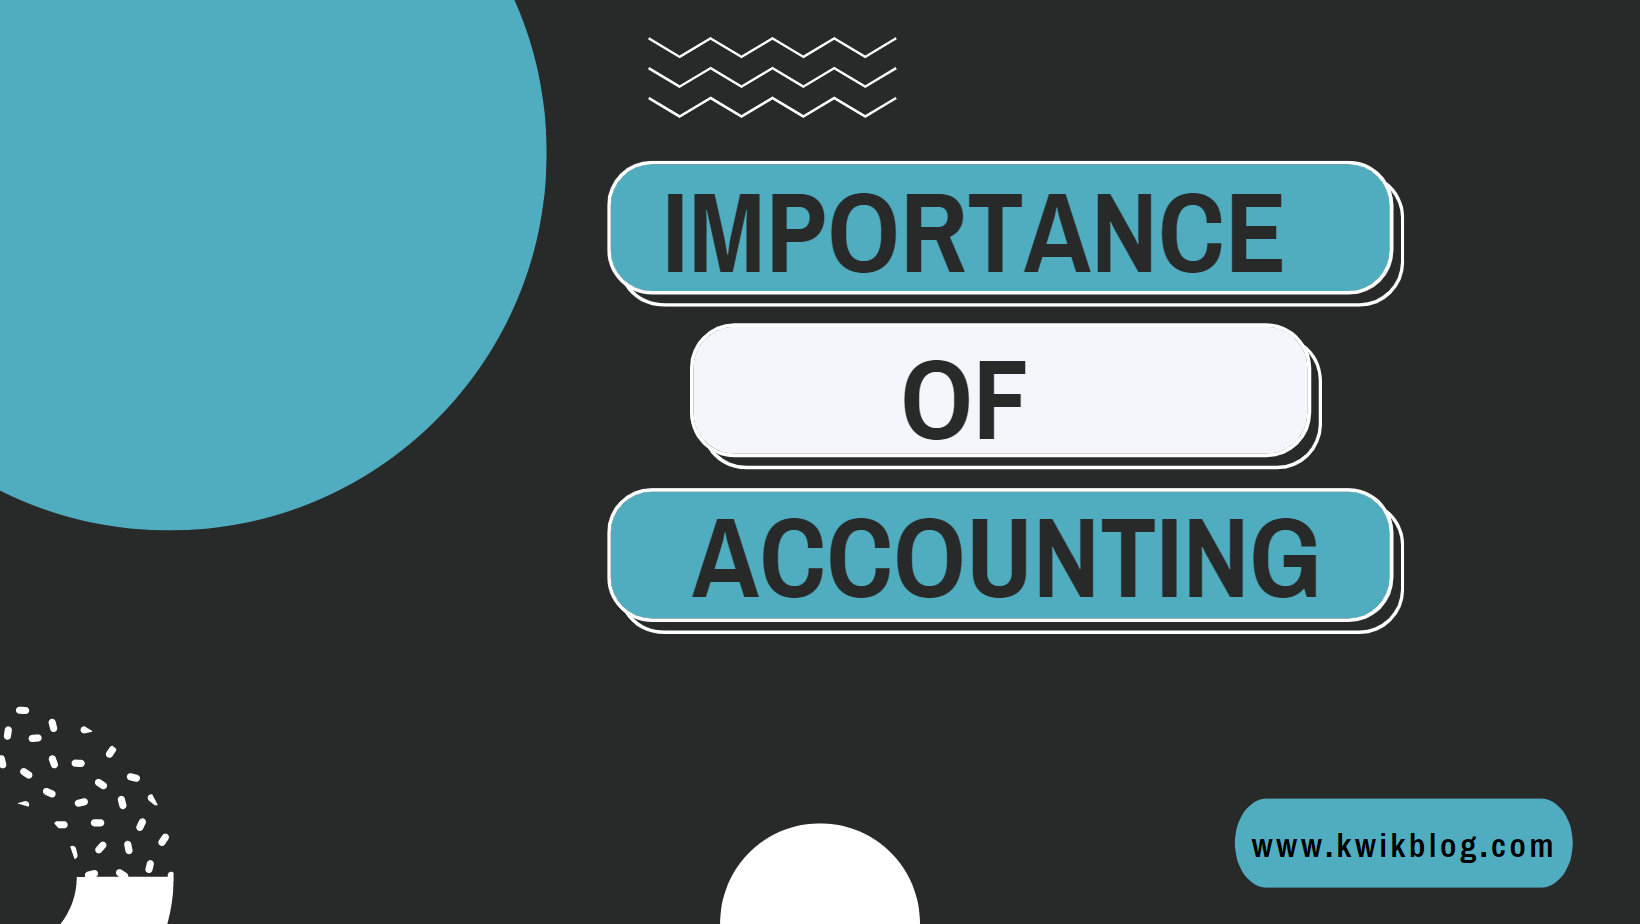 Importance of Accounting